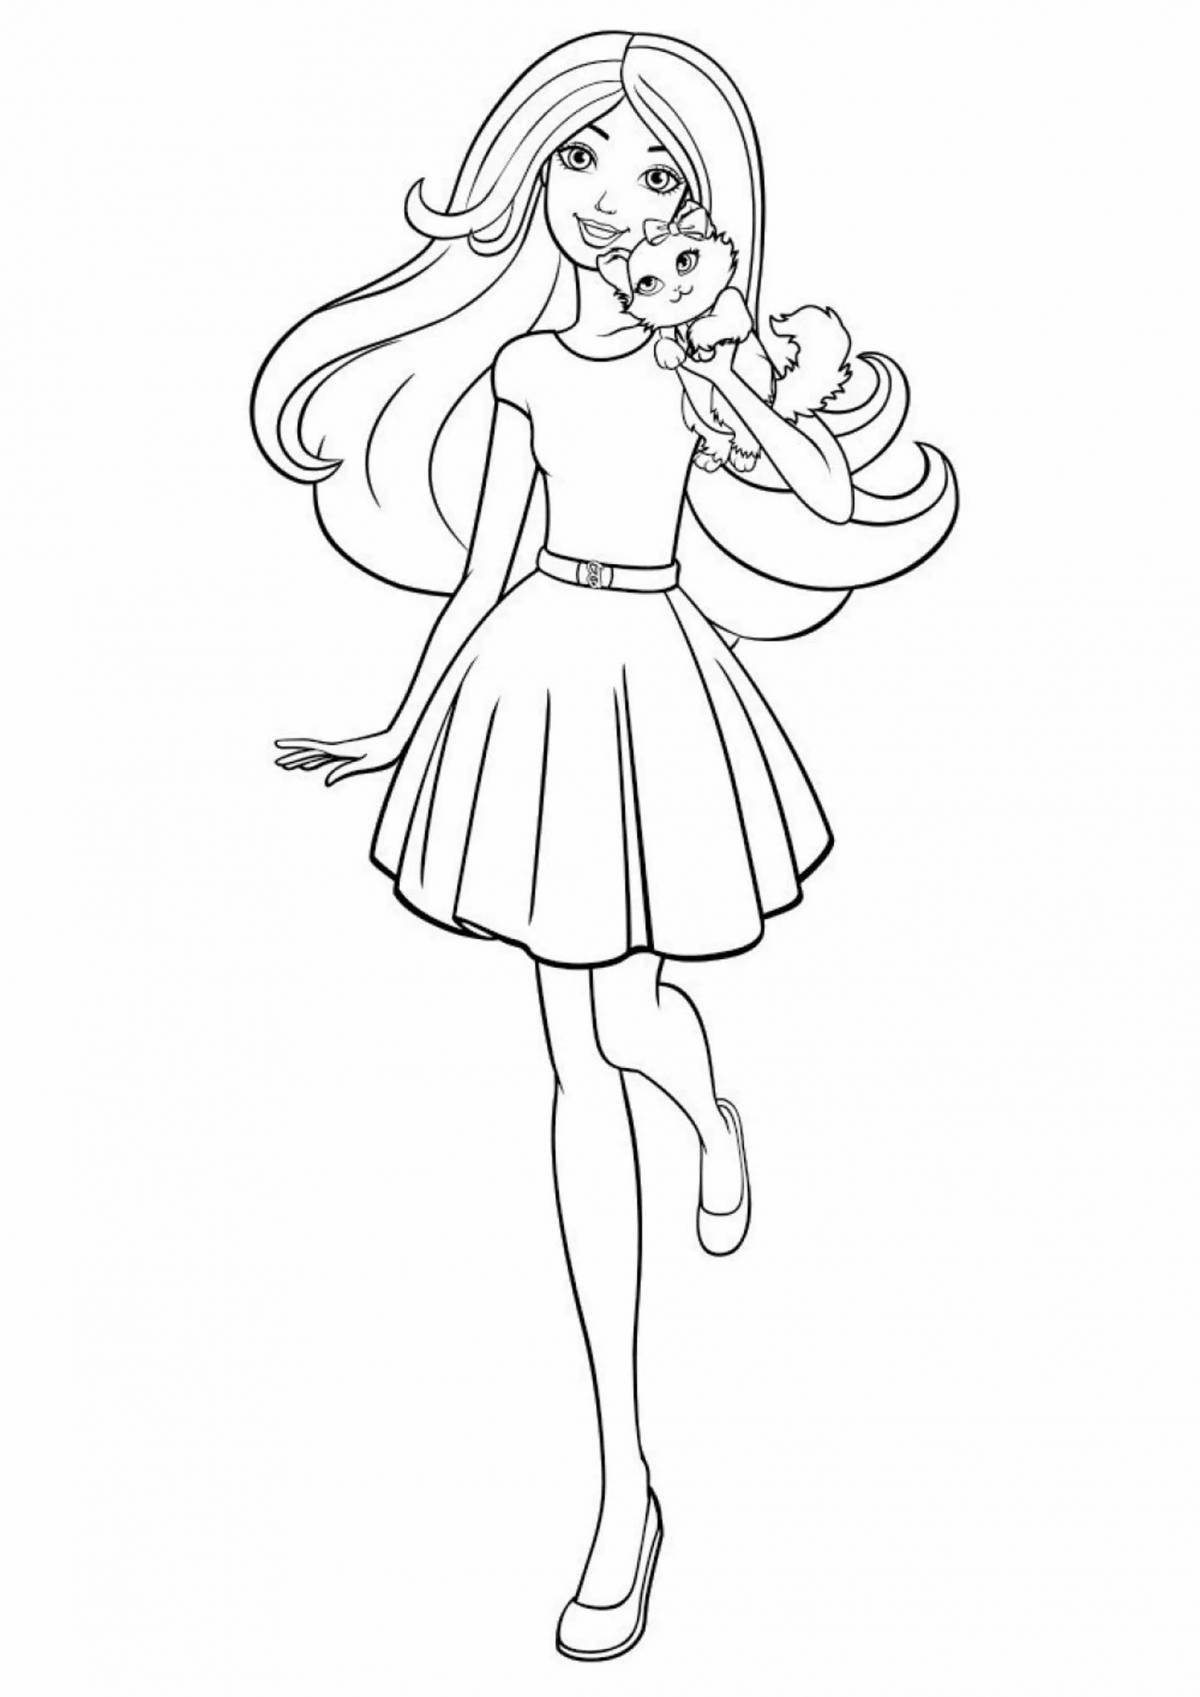 Full body dazzling coloring page